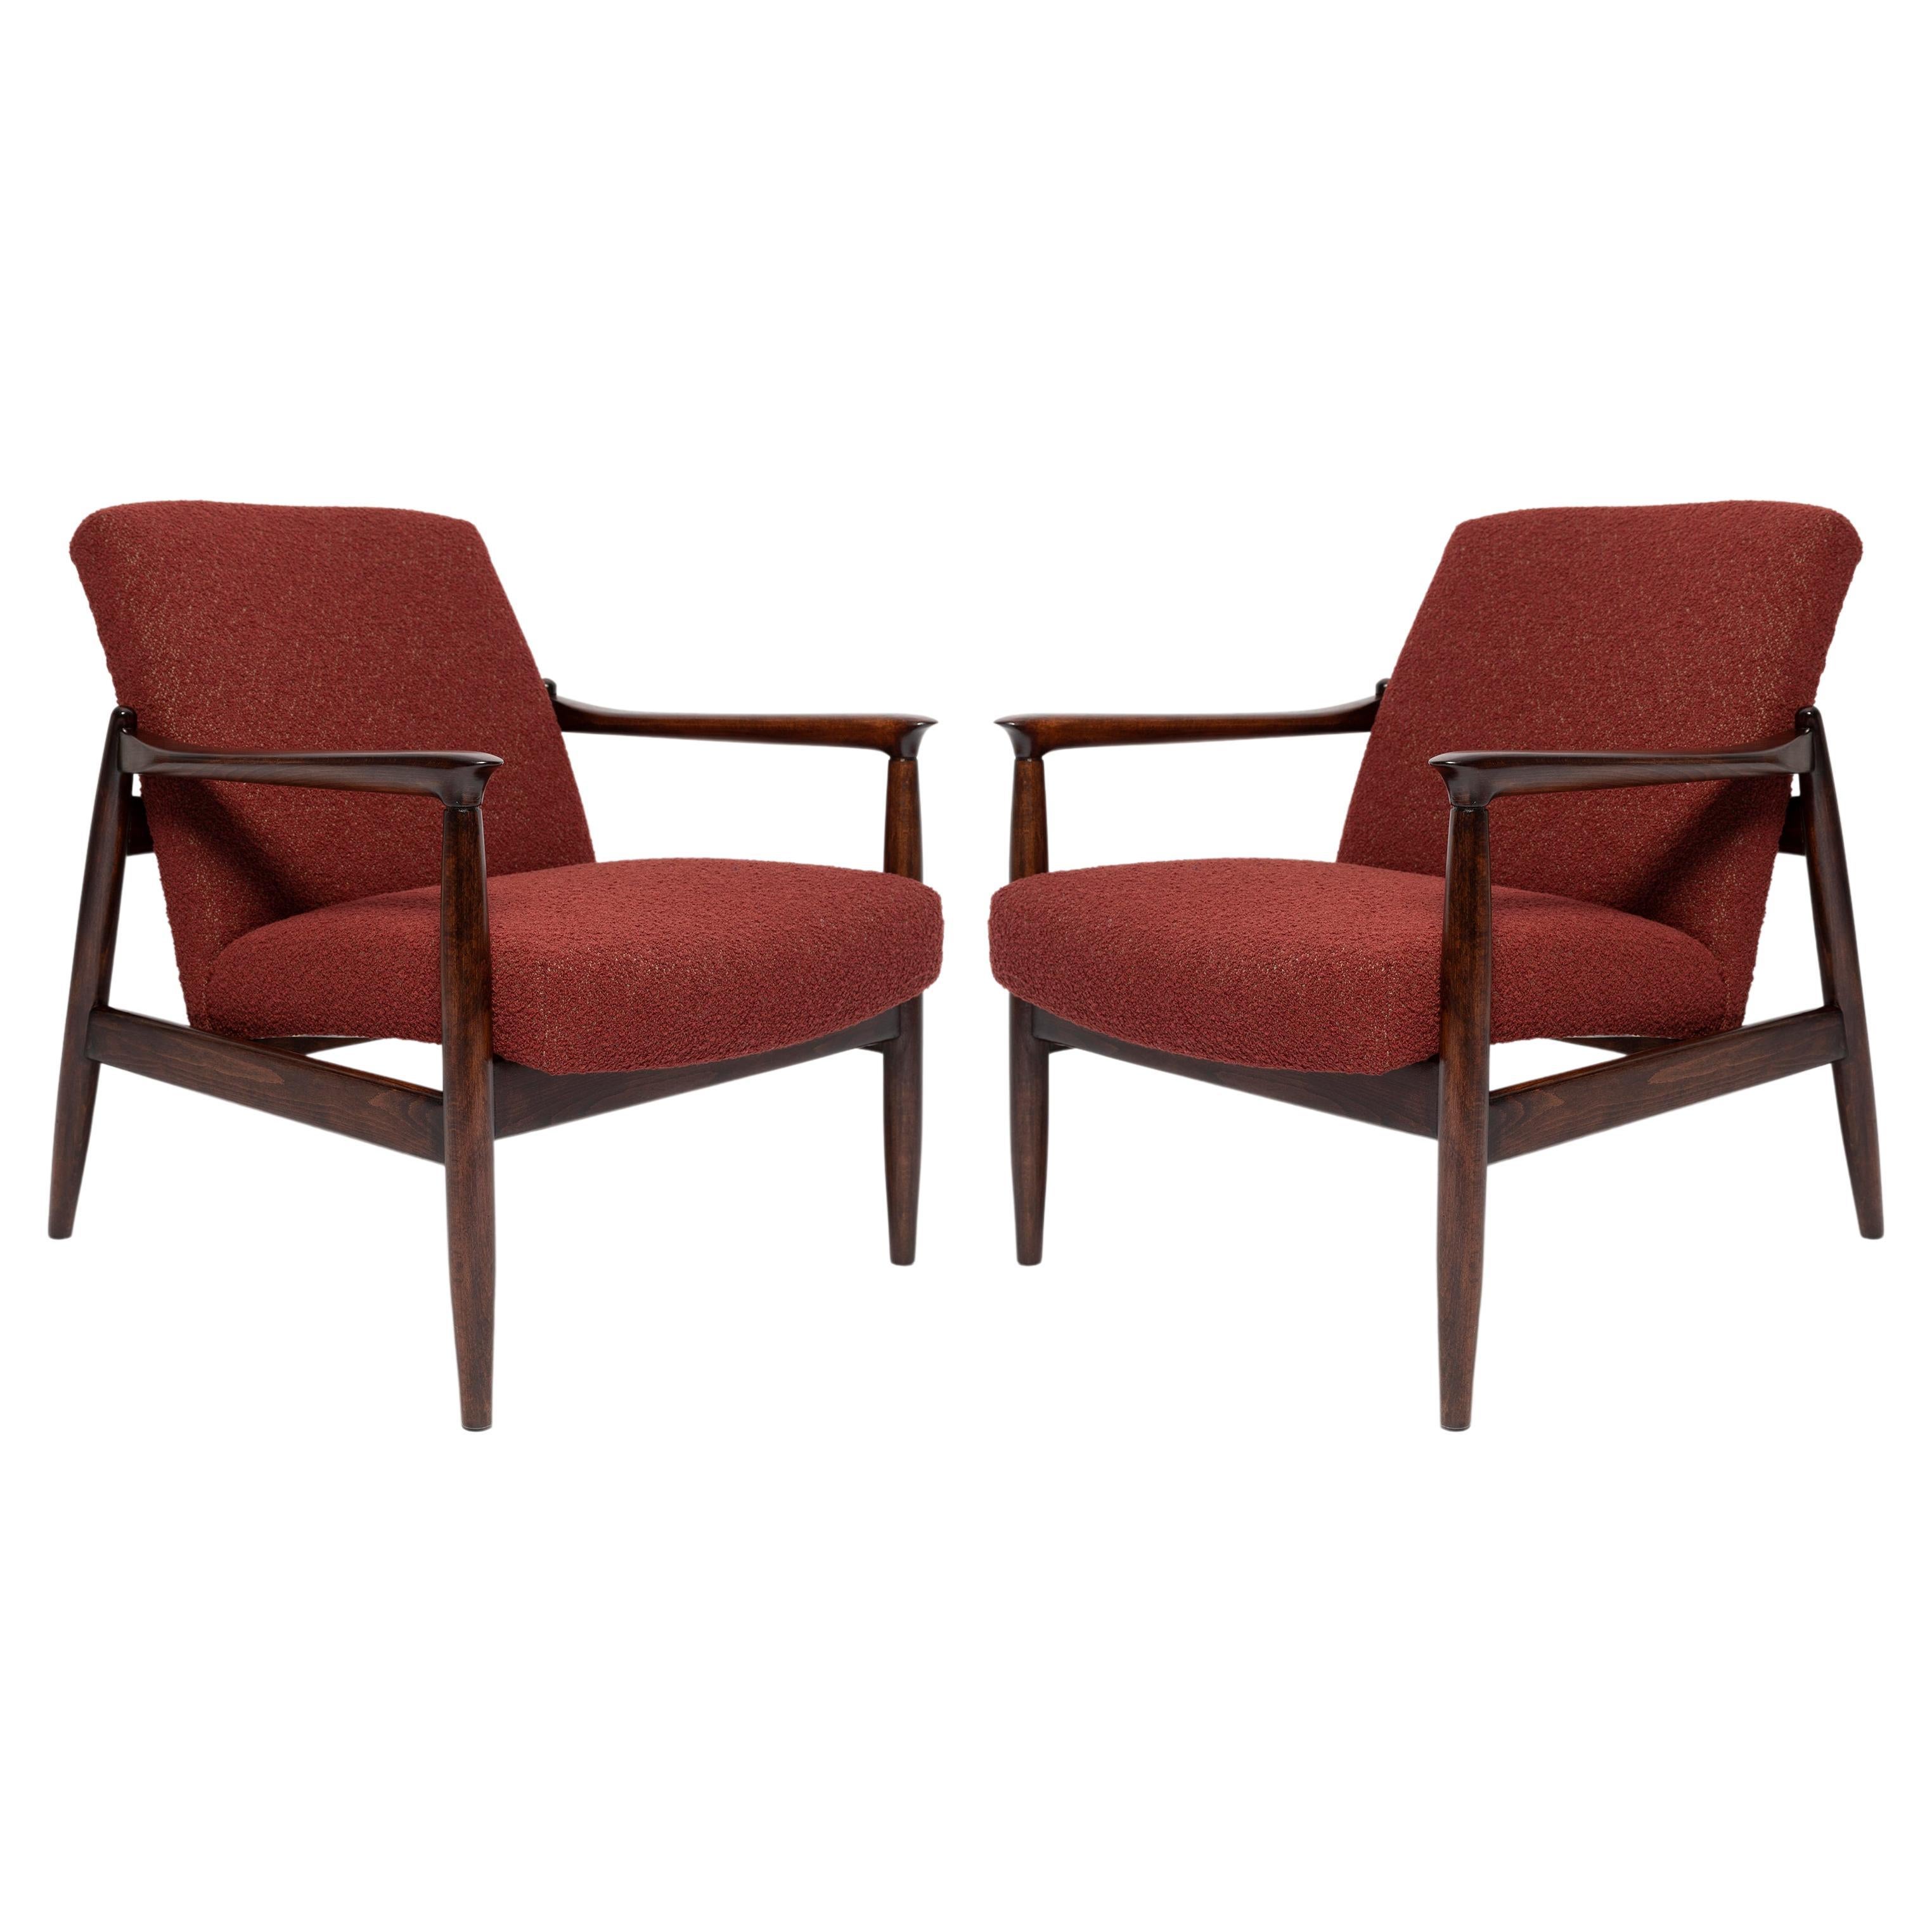 Two Mid Century Burgundy Boucle GFM-64 Armchairs, Edmund Homa, Europe, 1960s For Sale